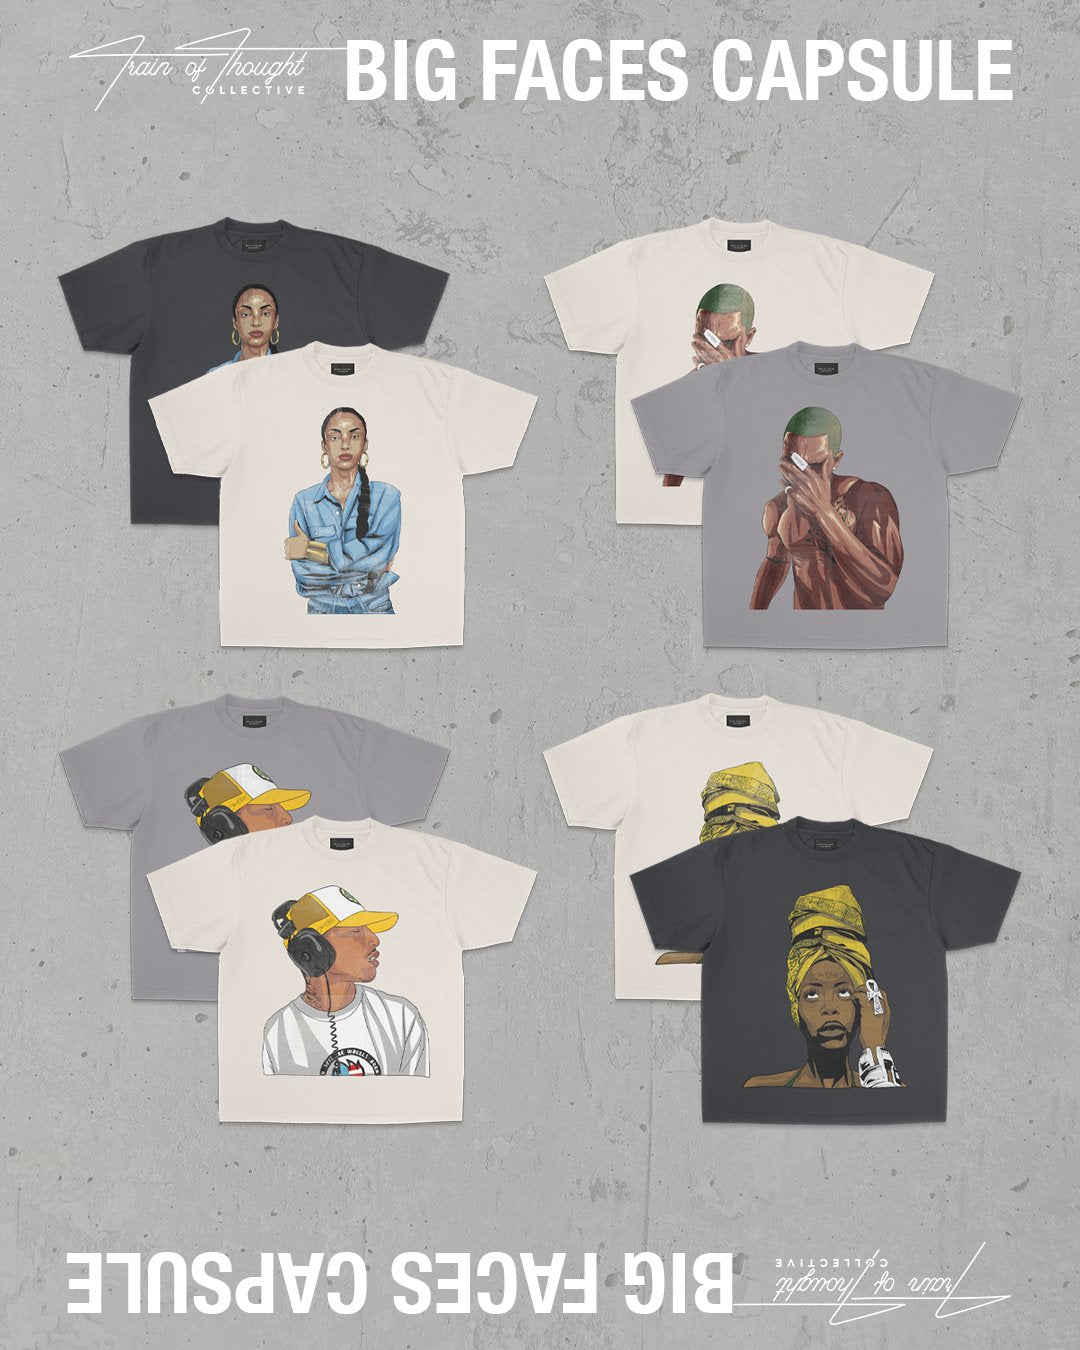 Big Faces Capsule - trainofthoughtcollective